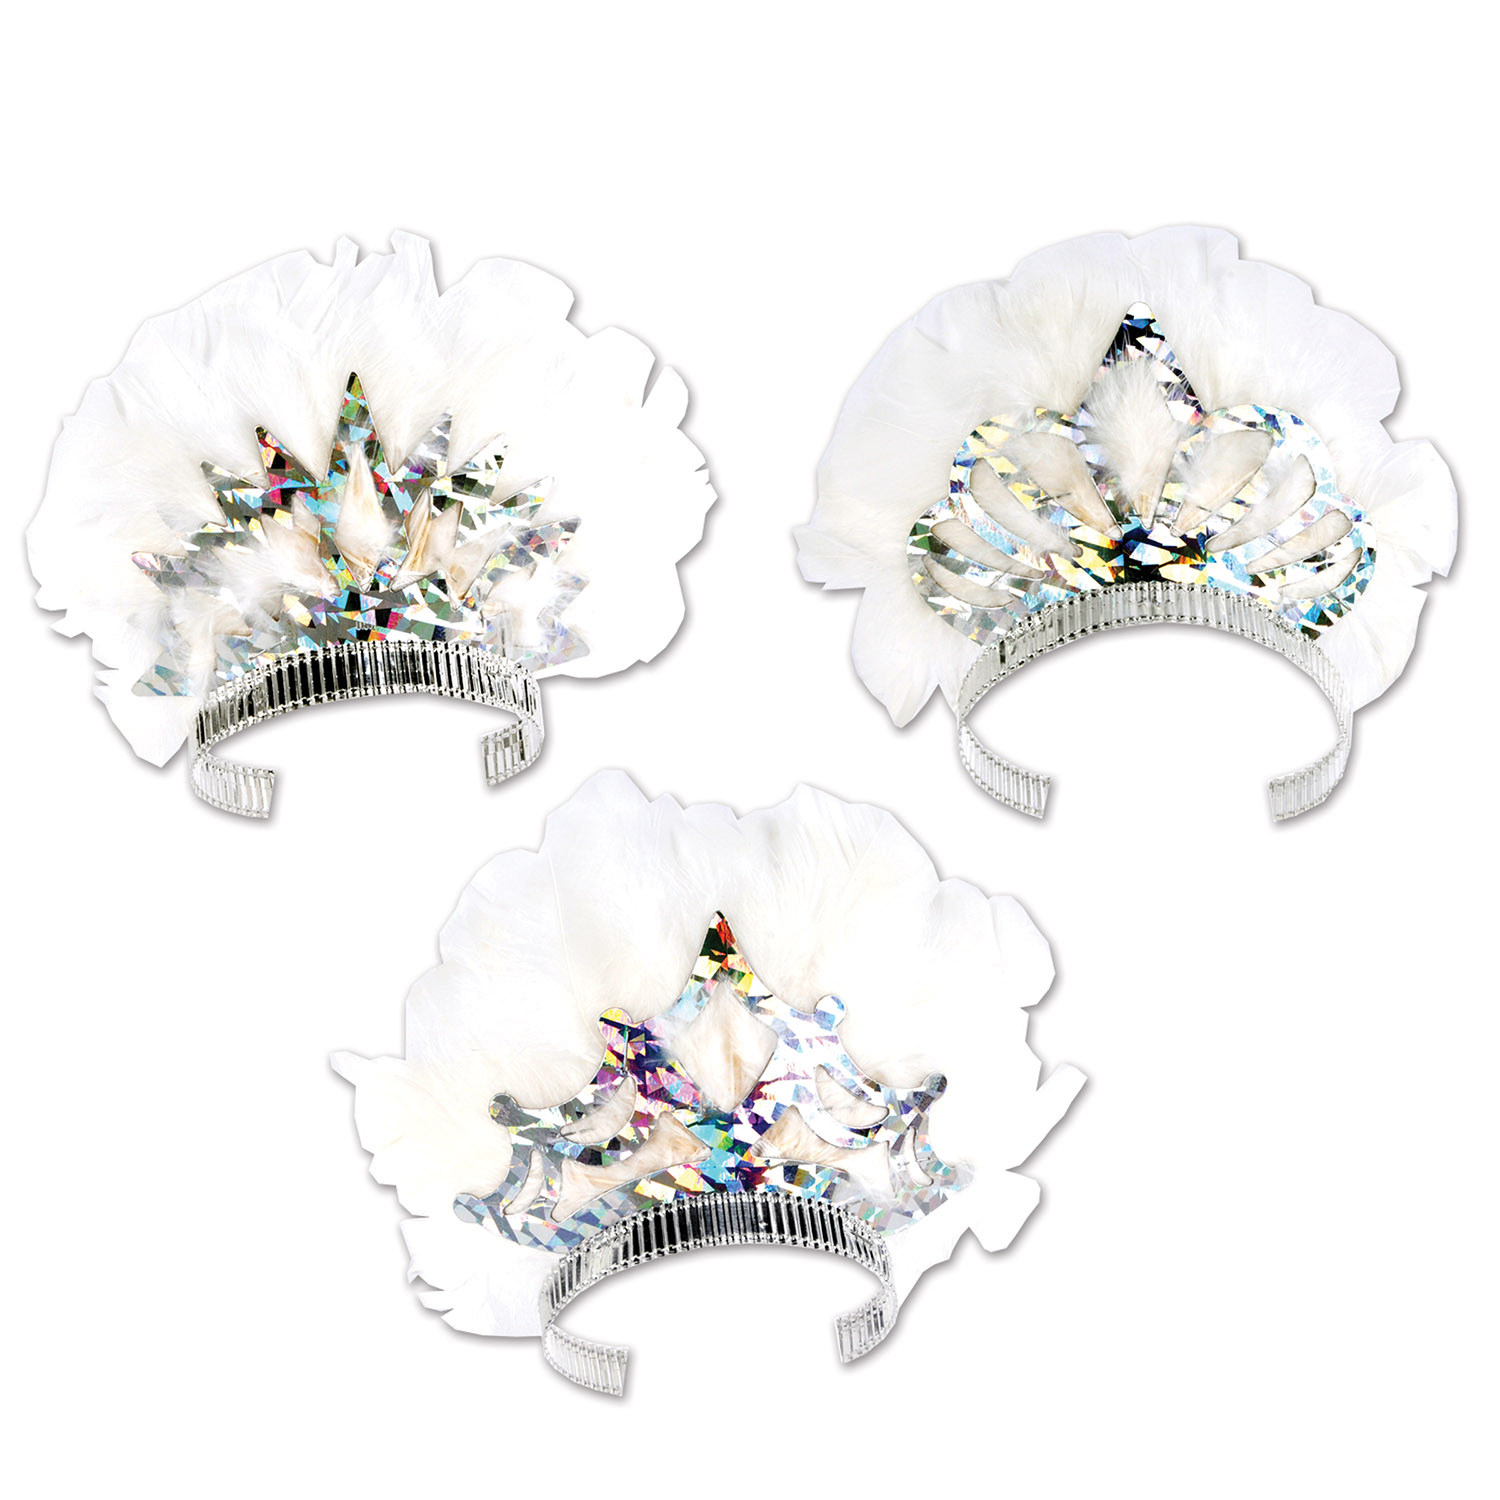 Three different designed prismatic tiaras with a spread of white feathers.